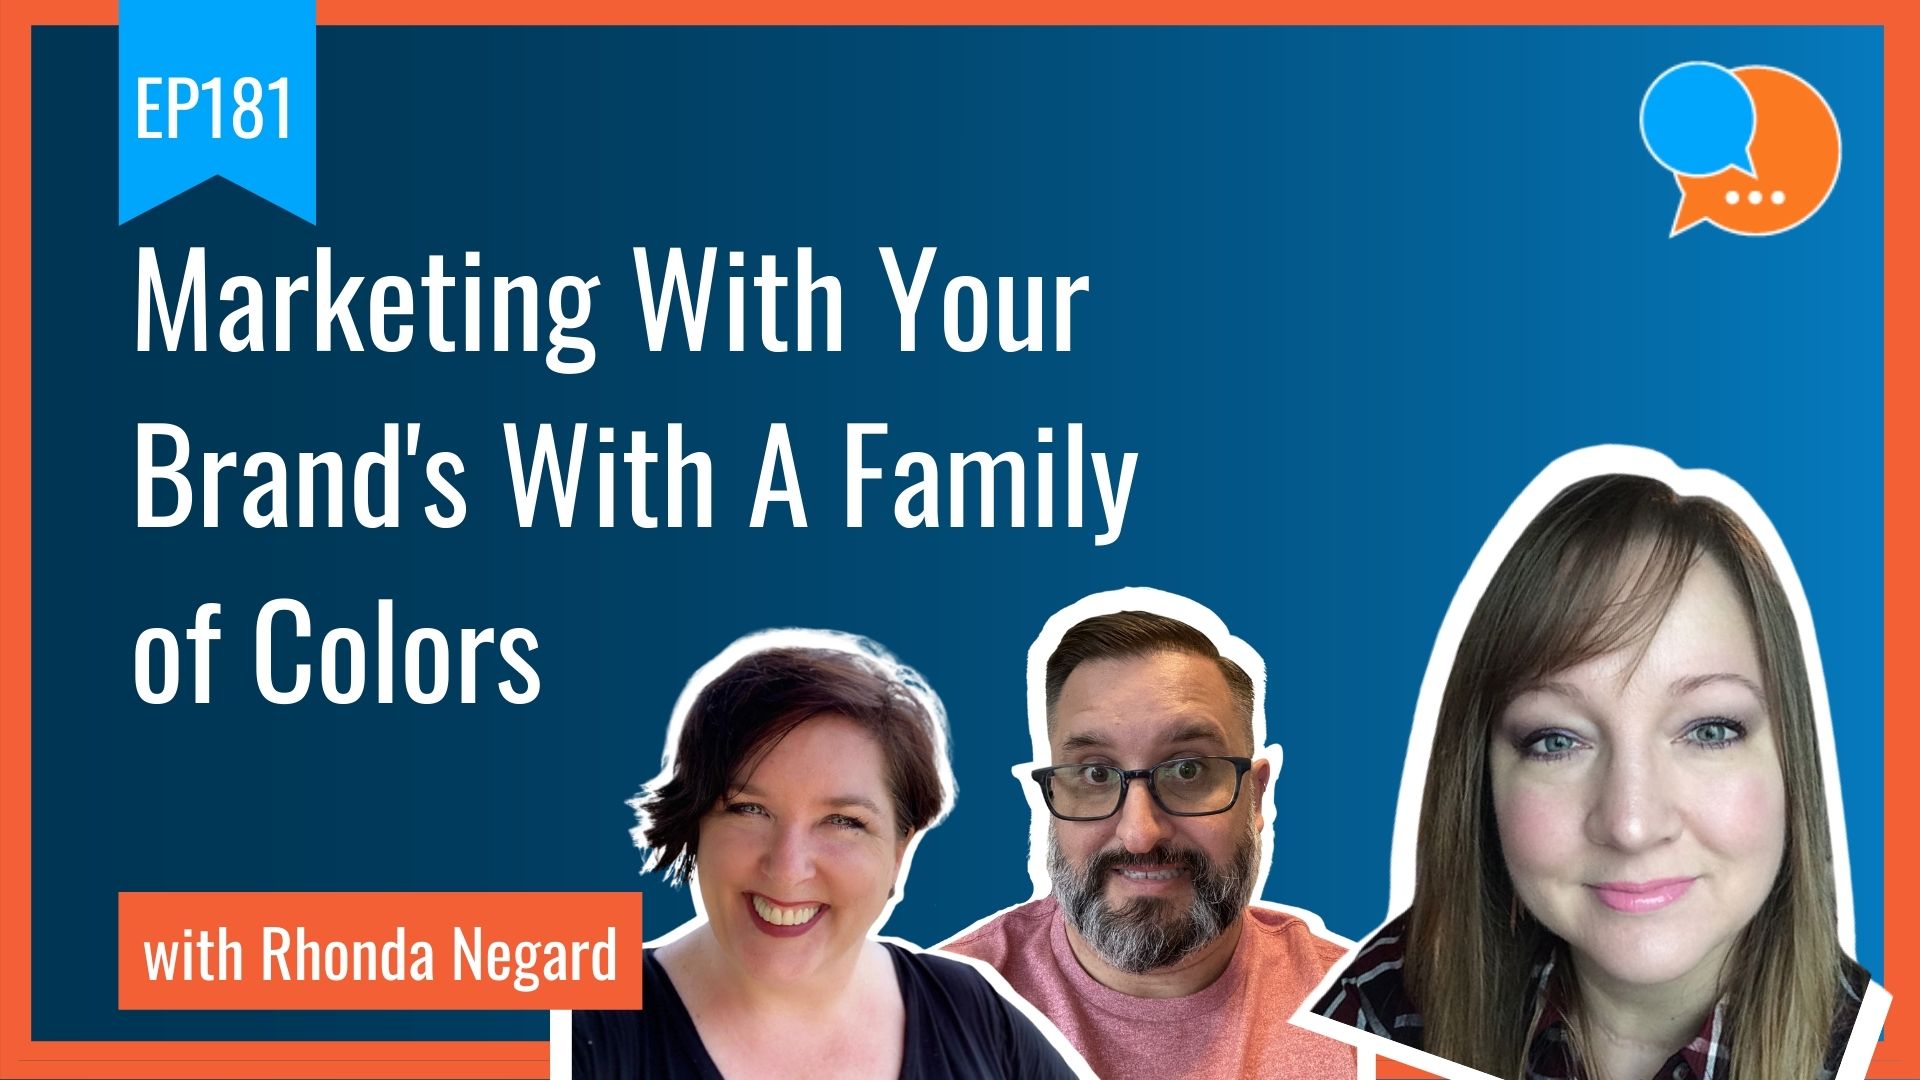 EP181 - Marketing Your Brand With A Family of Colors